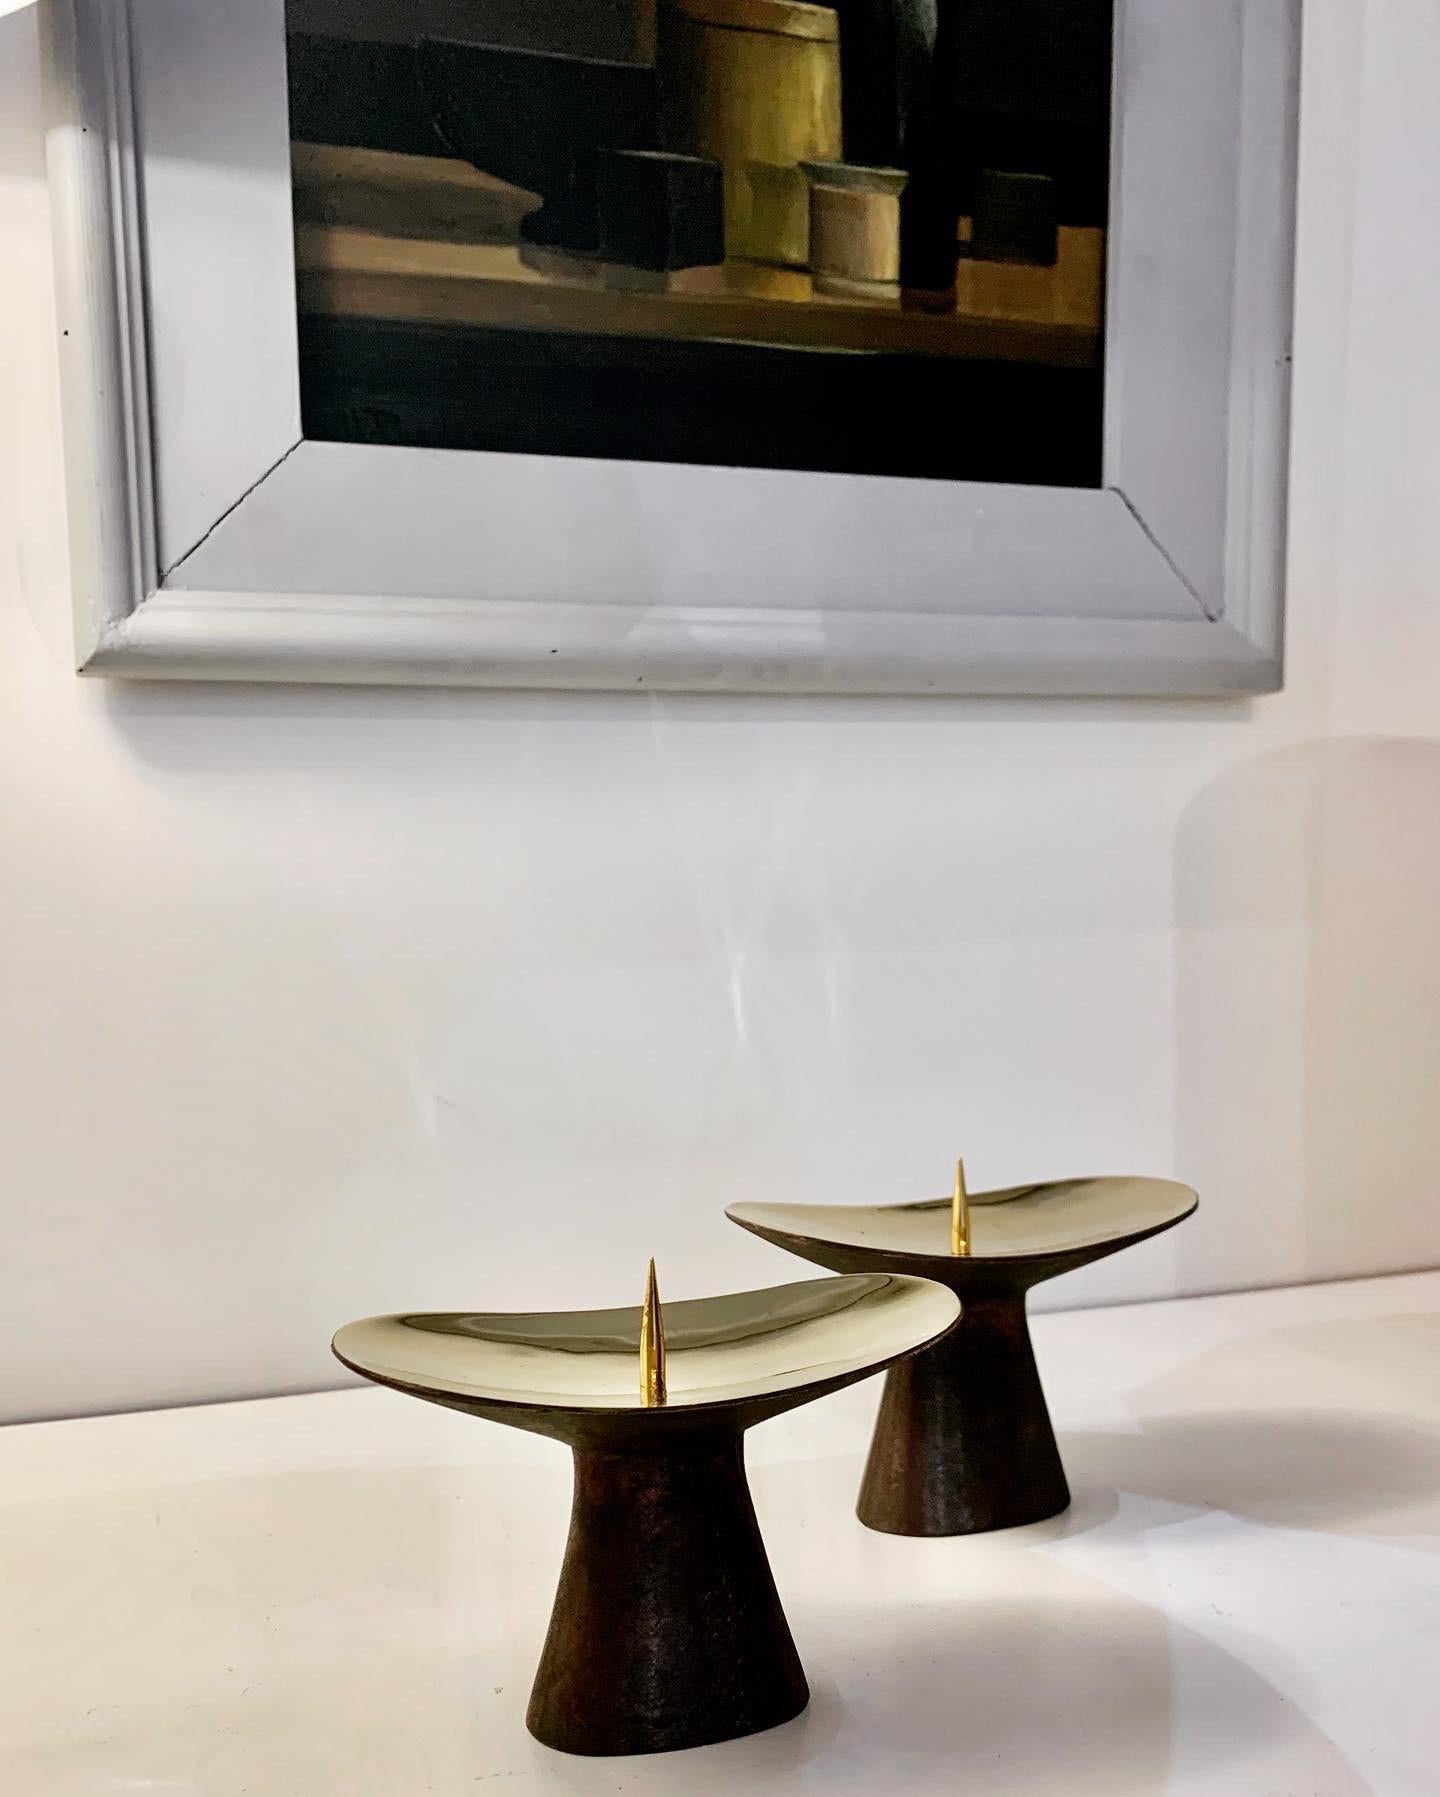 Pair of patinated candle holders designed by Carl Aubock in 1948. This signature piece from the Auböck collection is hand made manufactured in Vienna Austria workshop ever since 1948 and of the exact same quality since. 
The traditional Carl Auböck